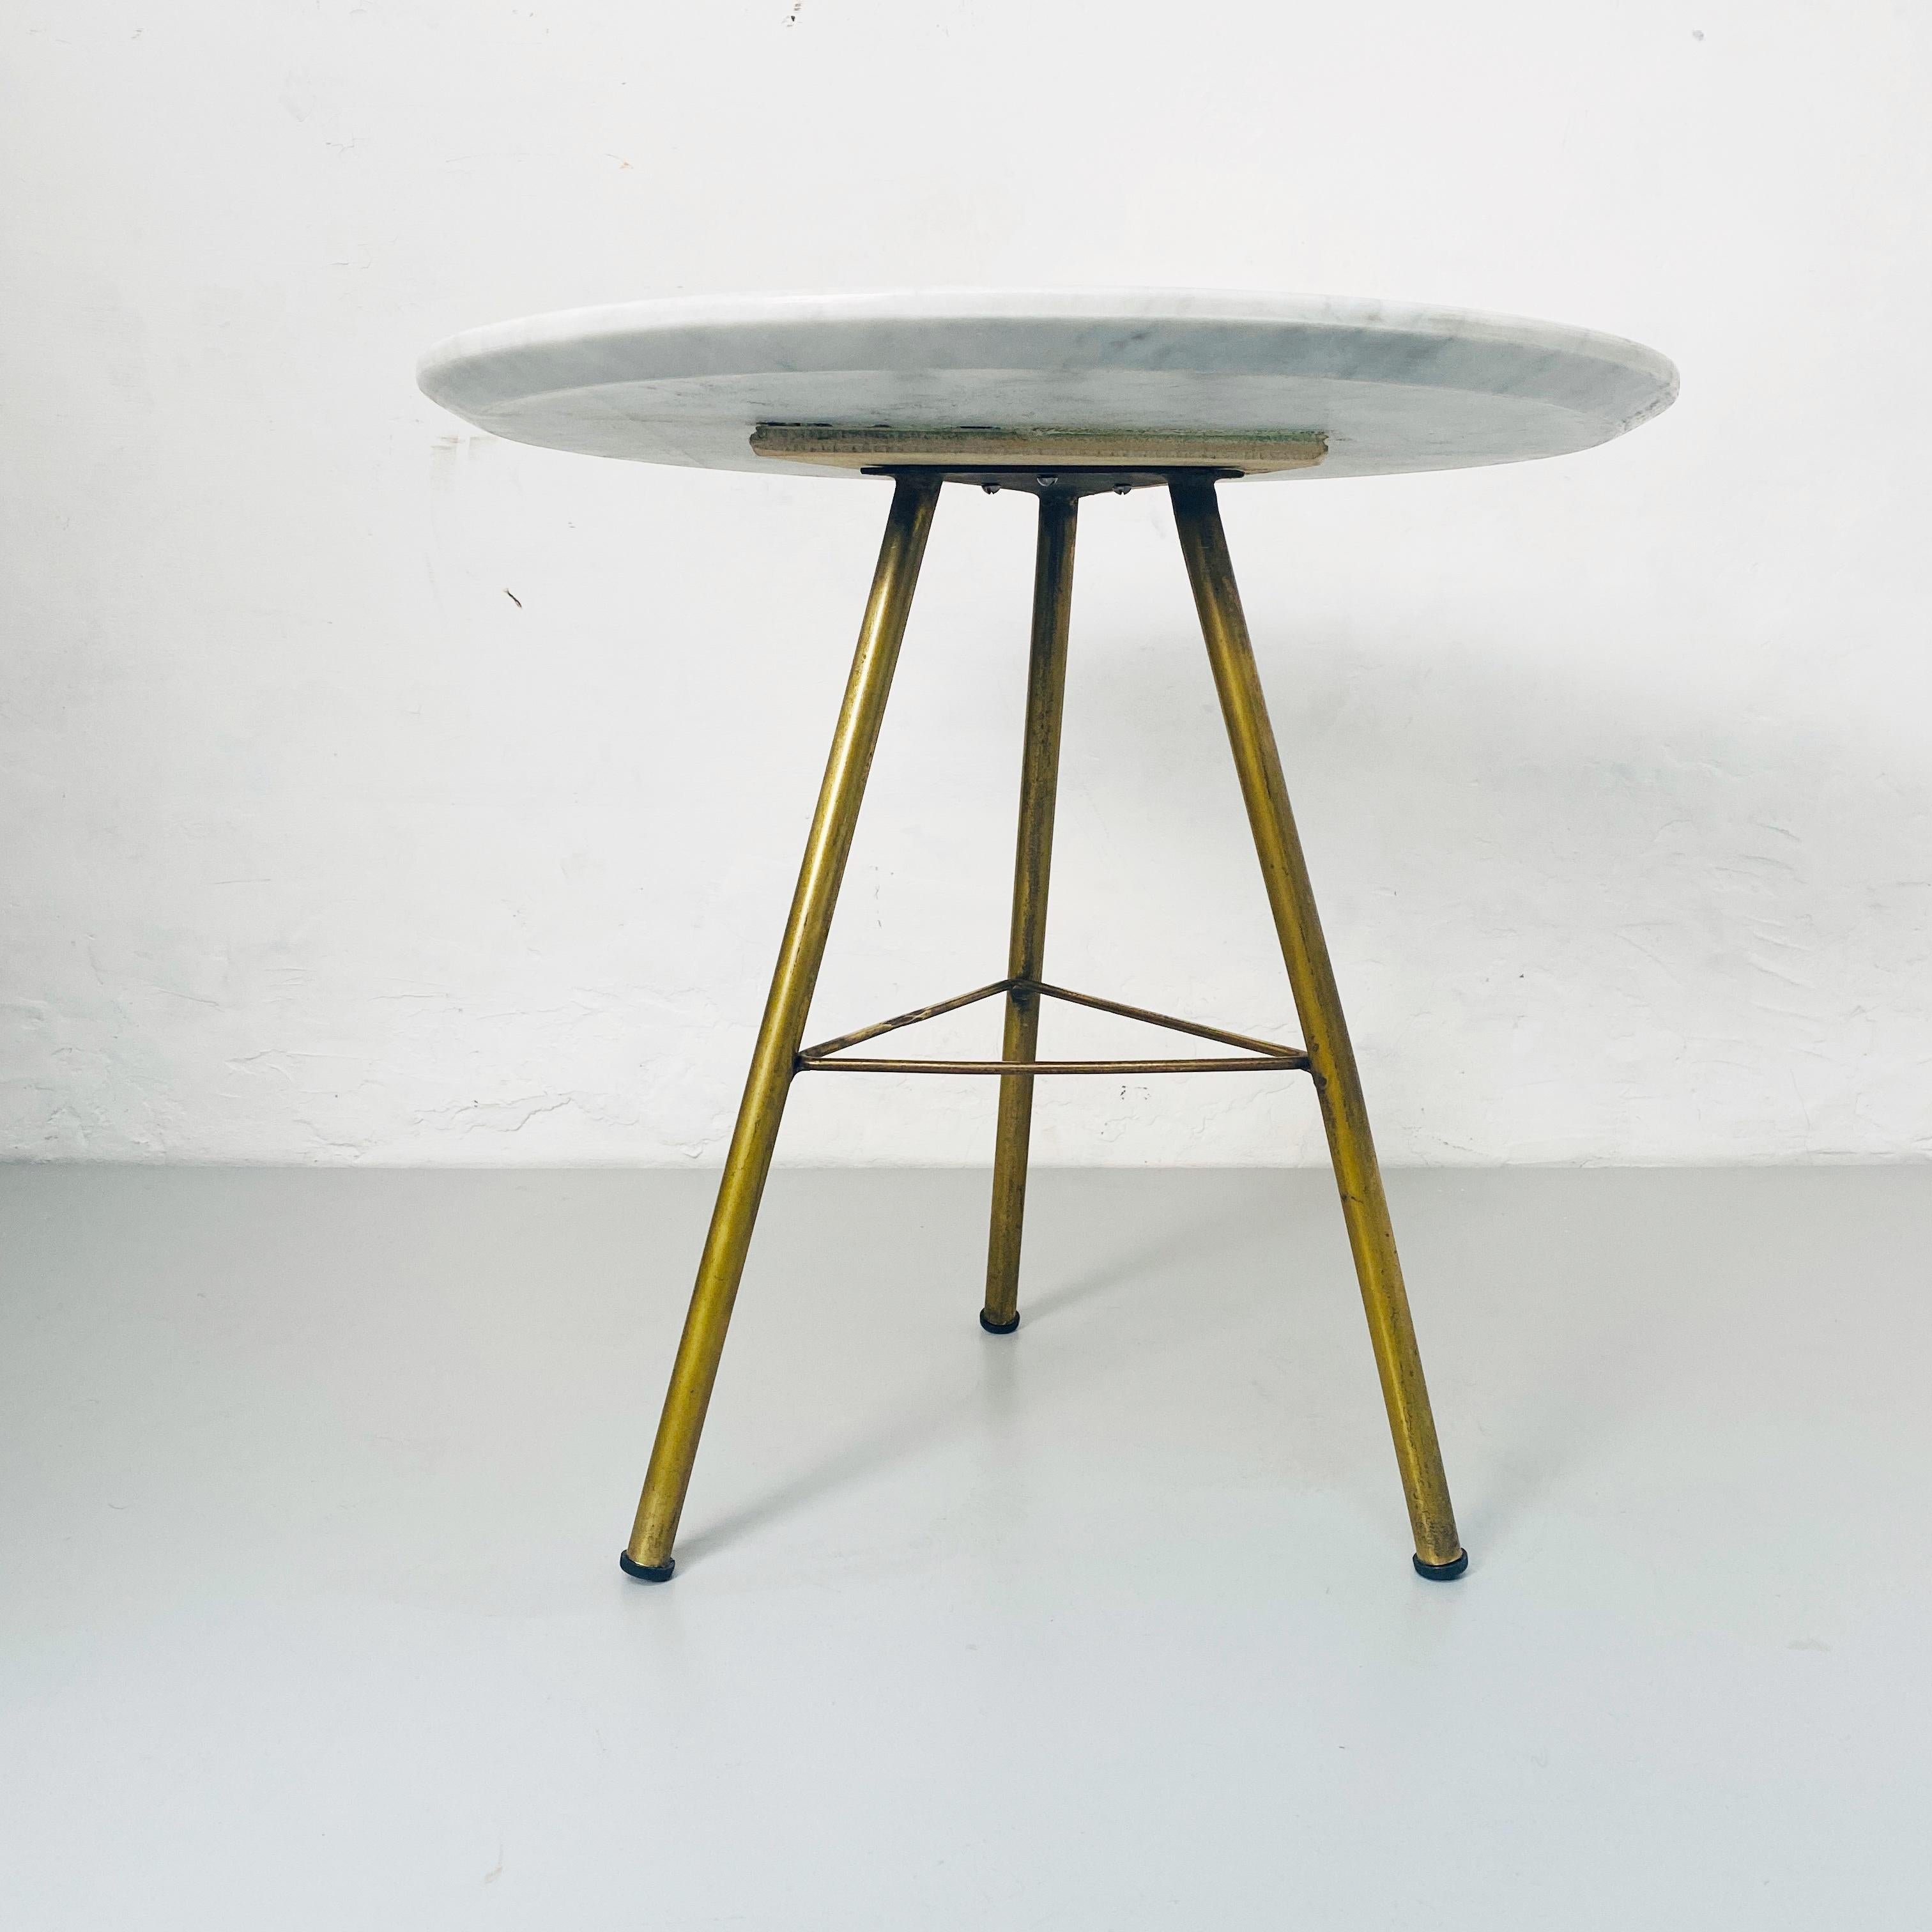 Mid-20th Century Italian Mid-Century Modern Round Marble and Brass Coffee Table, 1960s